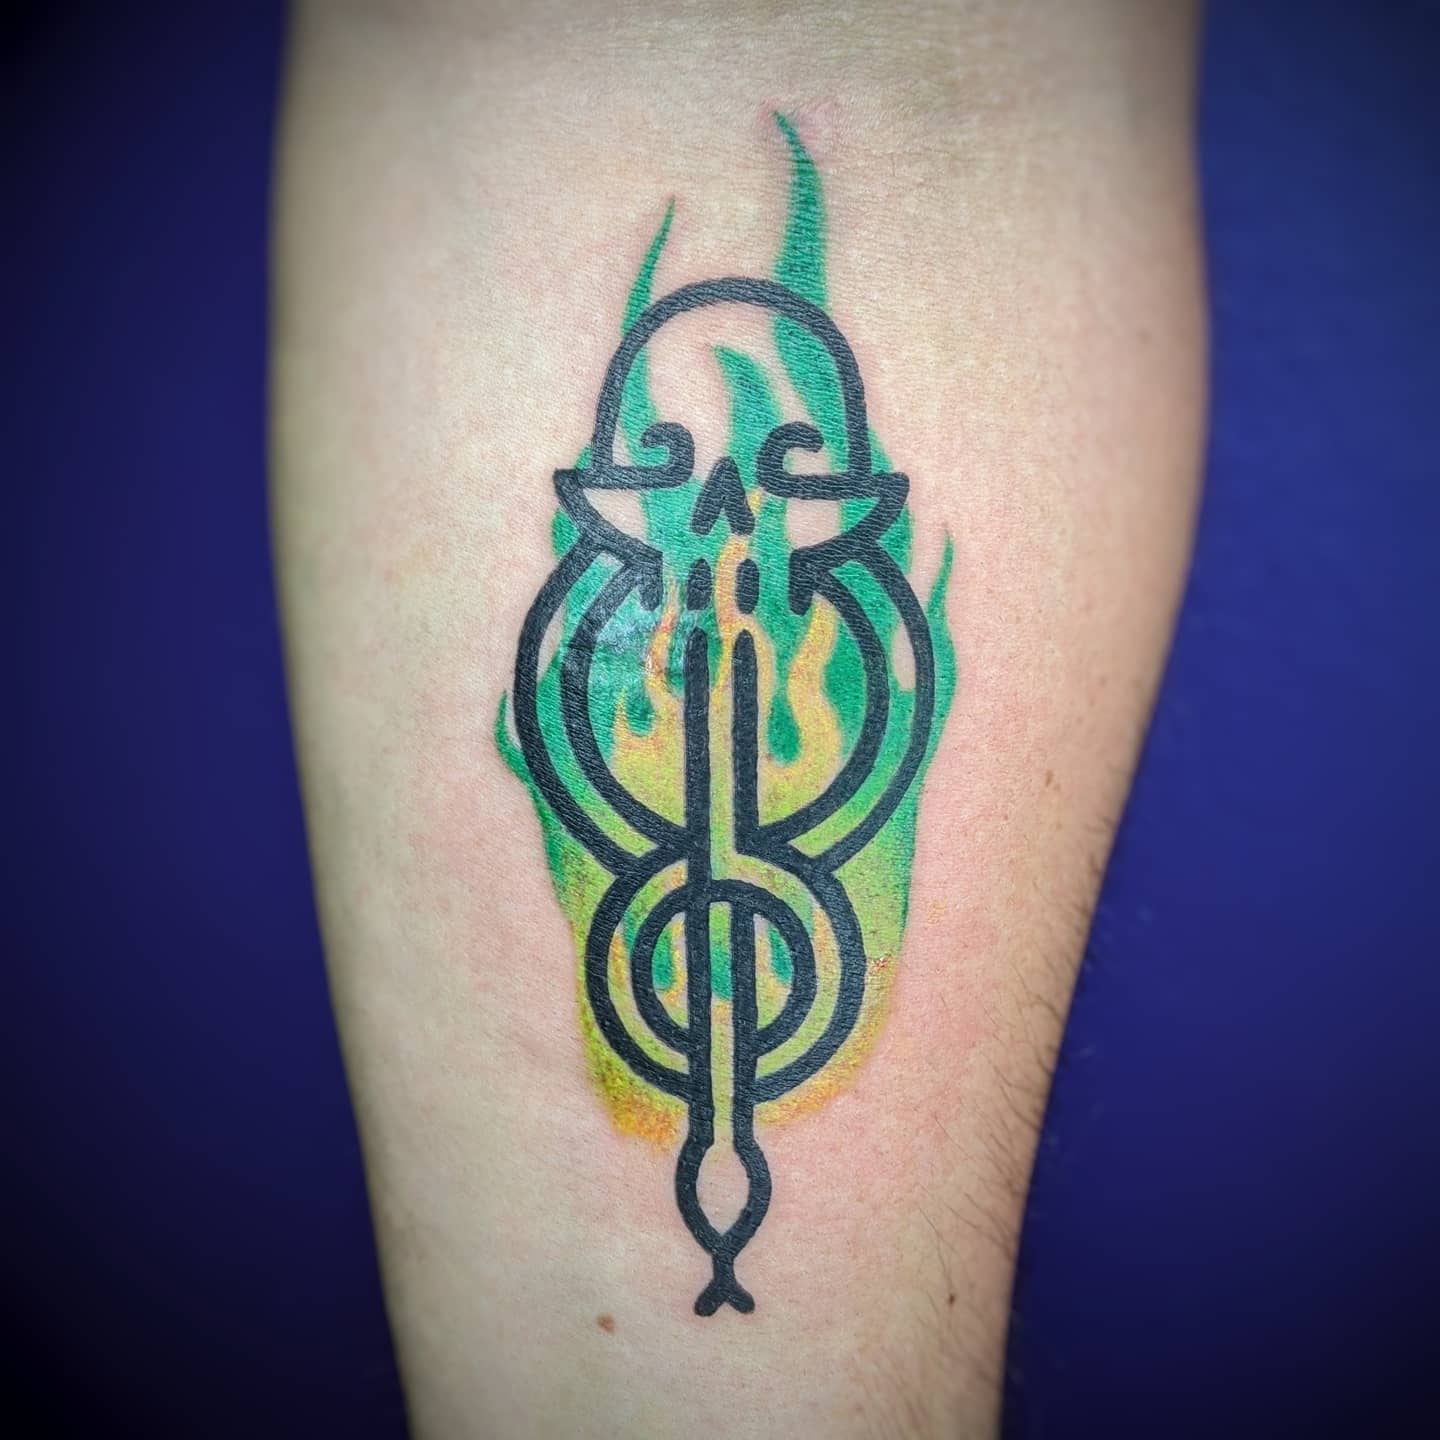 Death Eater Sign tattoo is the mark of a Death Eater. The sign can be found on the inner left forearm of the Death Eater, and is used to identify them as a follower of Lord Voldemort. Thus, let's get it on your forearm, too!